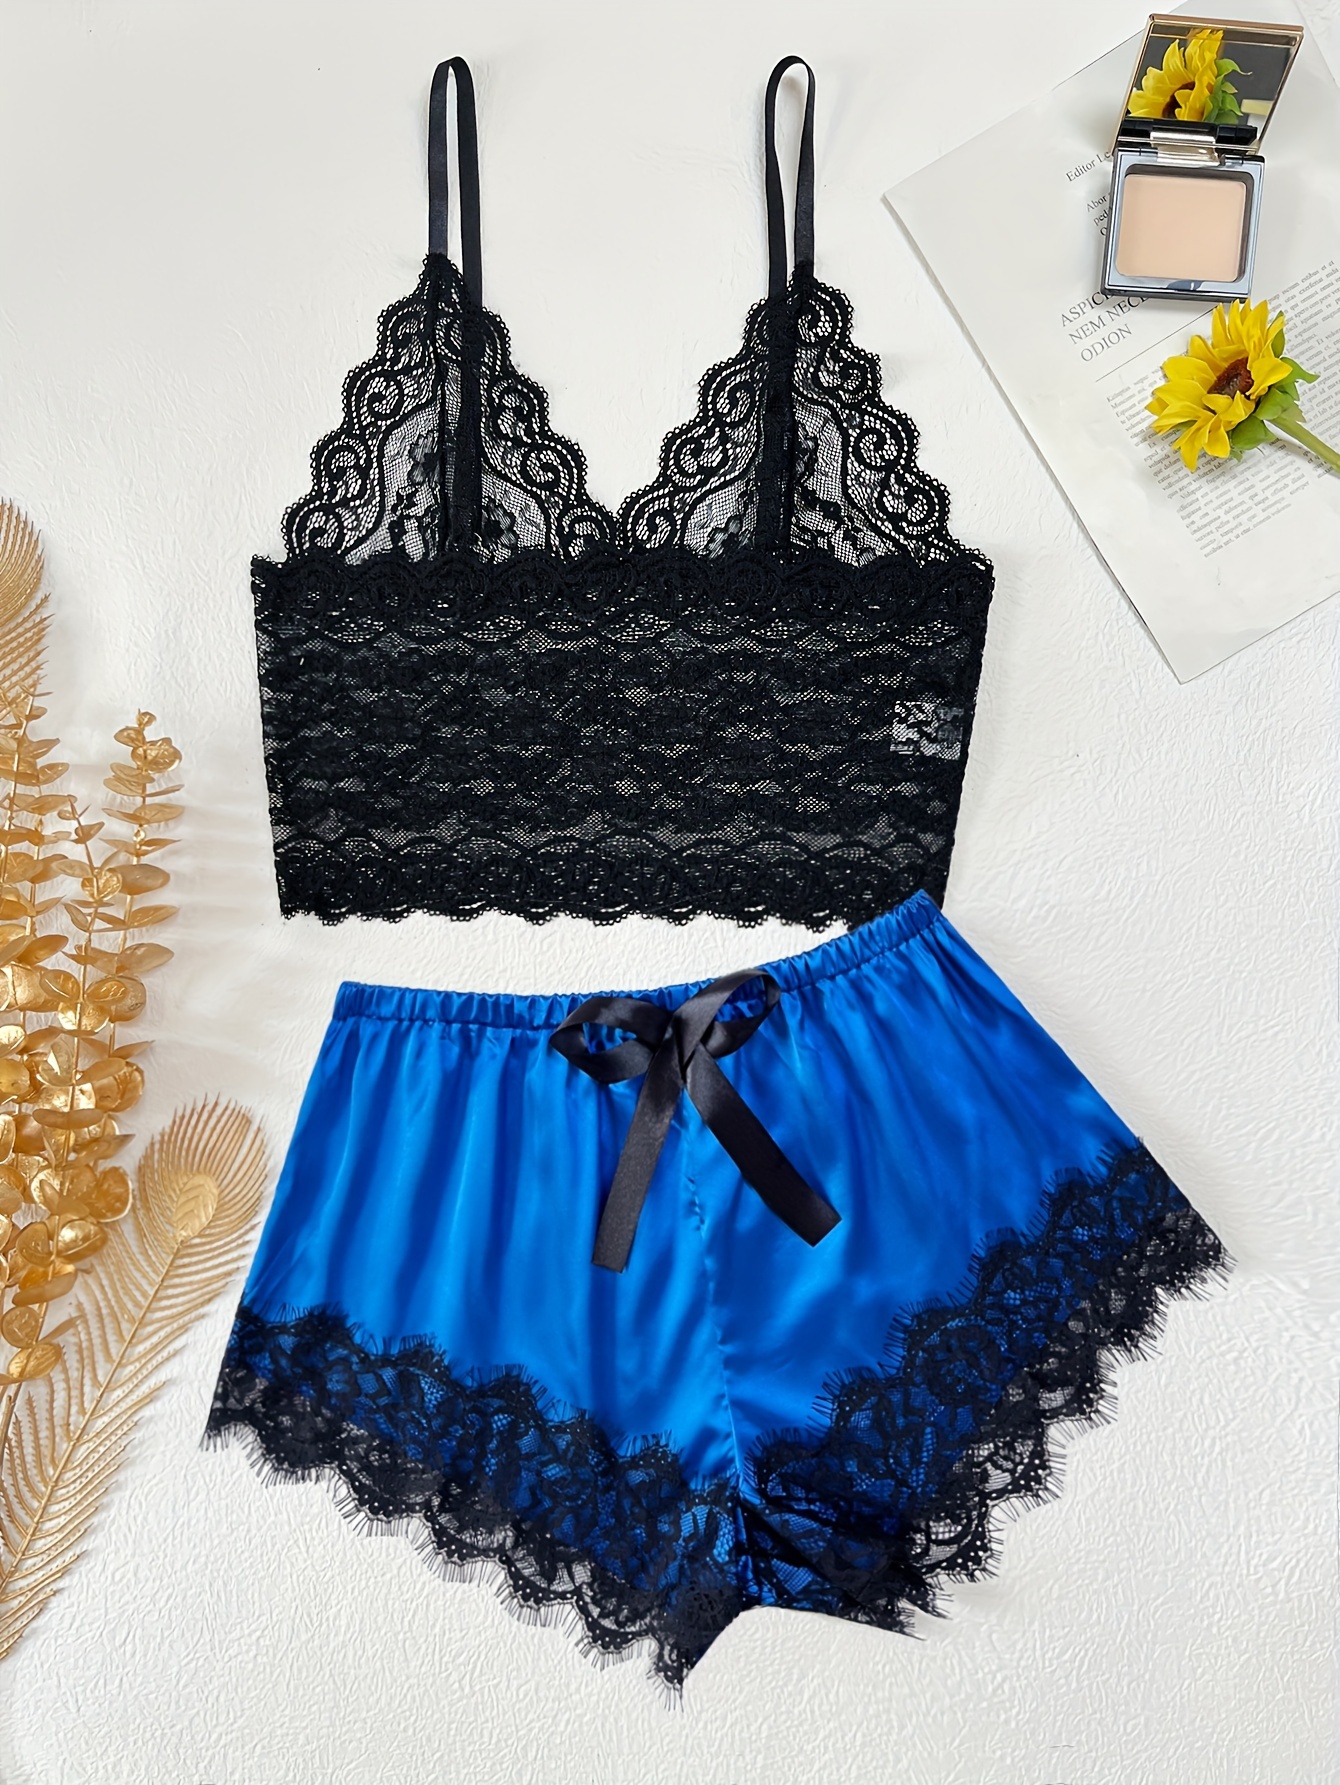 Teal Blue Sexy Satin Lace Cami Set French Knickers Negligee